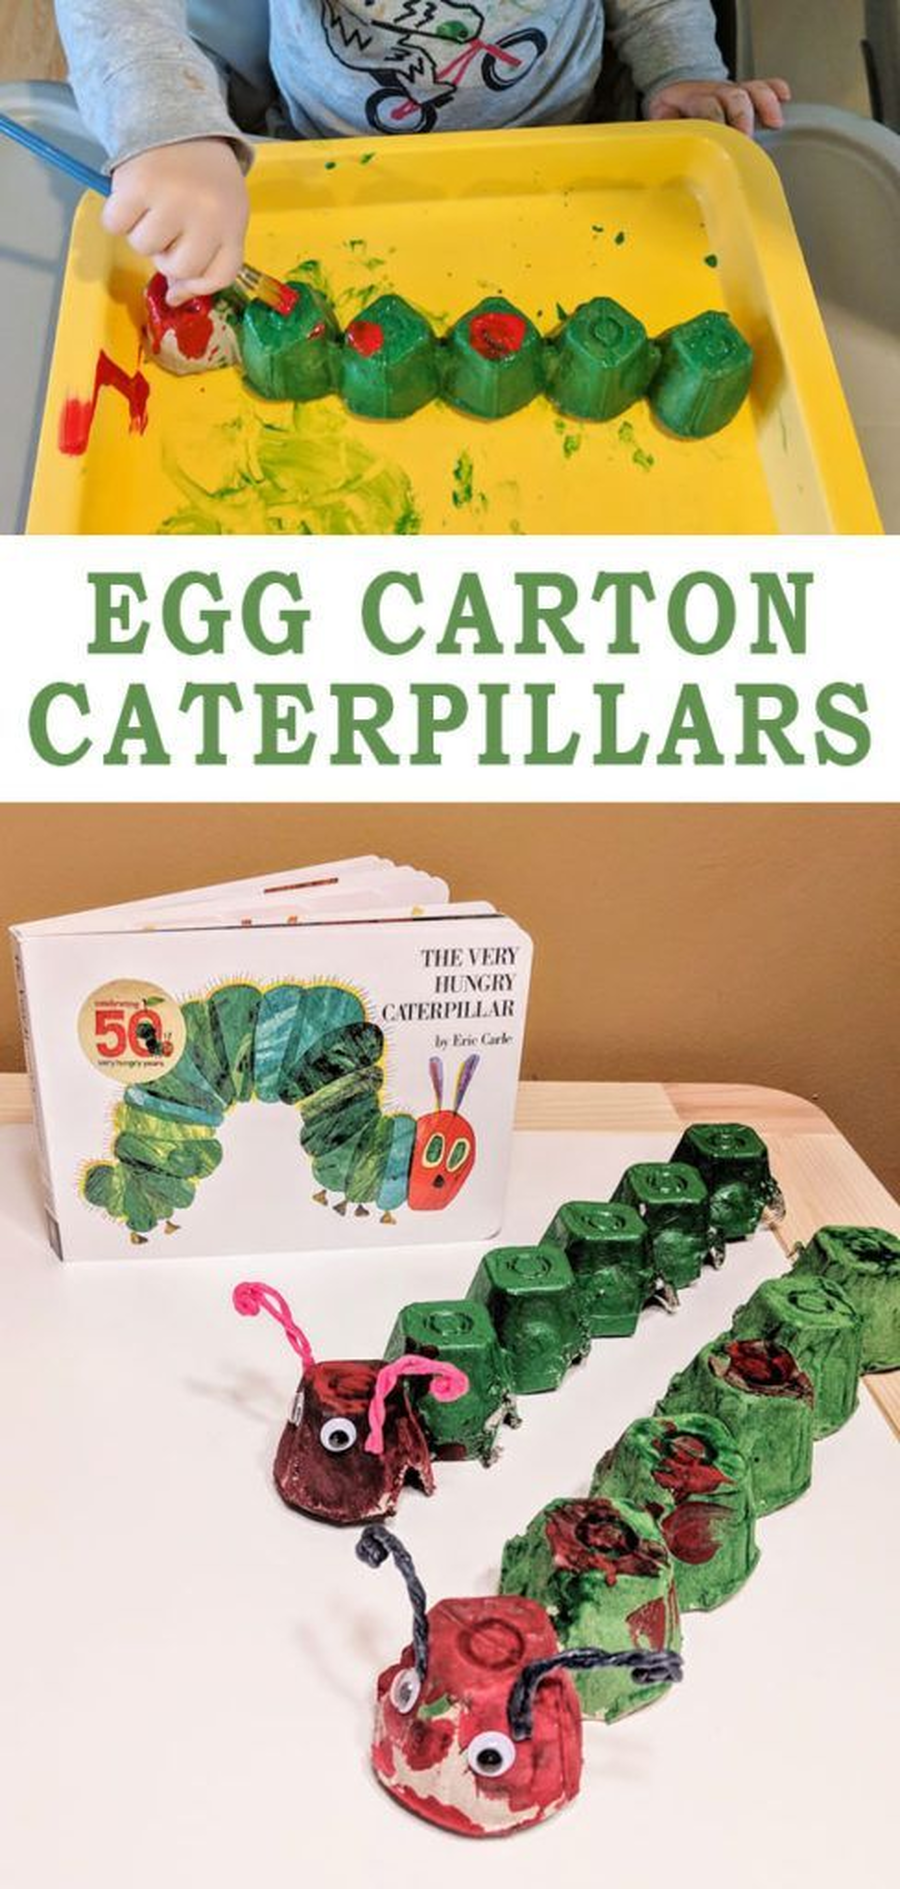 Make a Hungry Caterpillar using different boxes you have around the home.